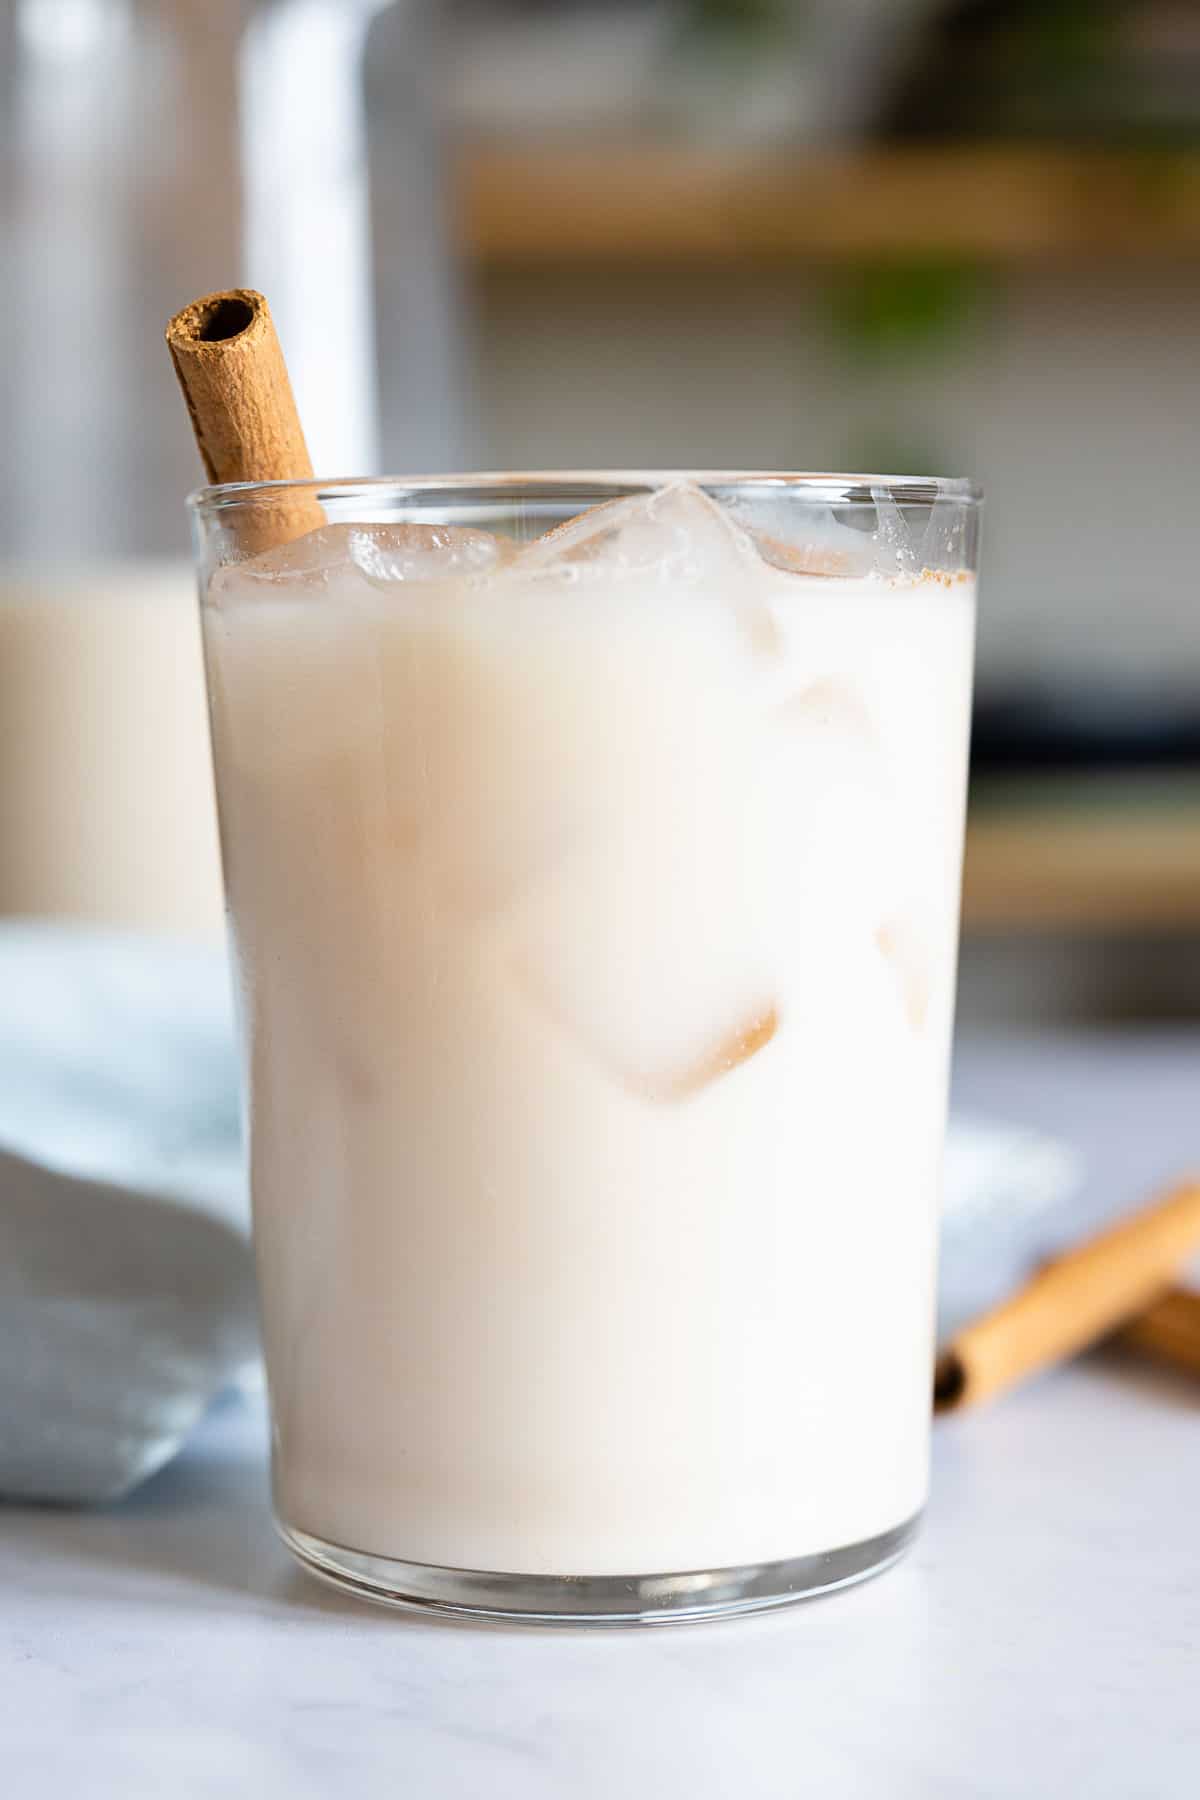 Agua de Horchata in a glass with ice and cinnamon stick sticking out.